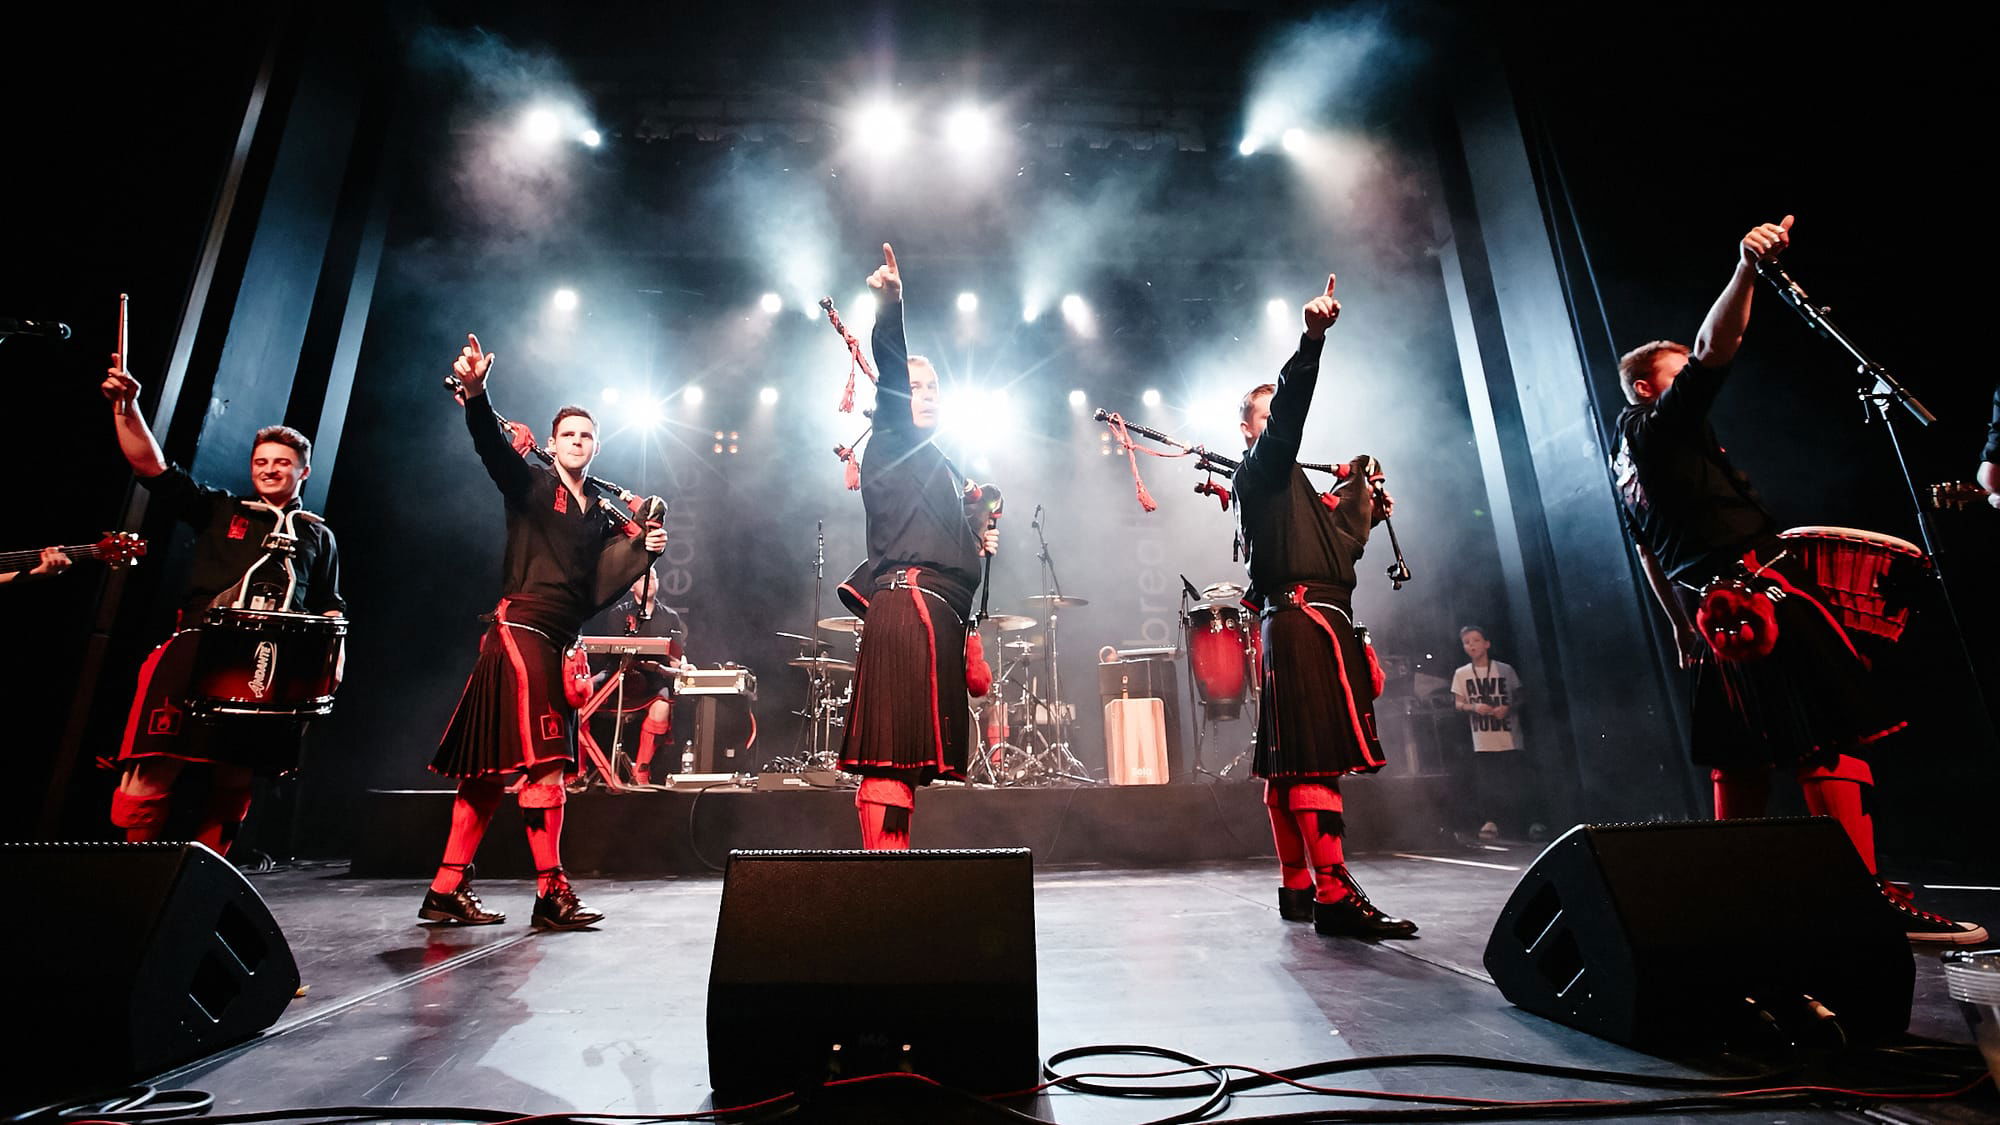 METRMAG Spotlight On: Willie Armstrong and "The Red Hot Chilli Pipers" - Hanover Theatre and Conservatory for the Performing Arts (Worcester, MA.)